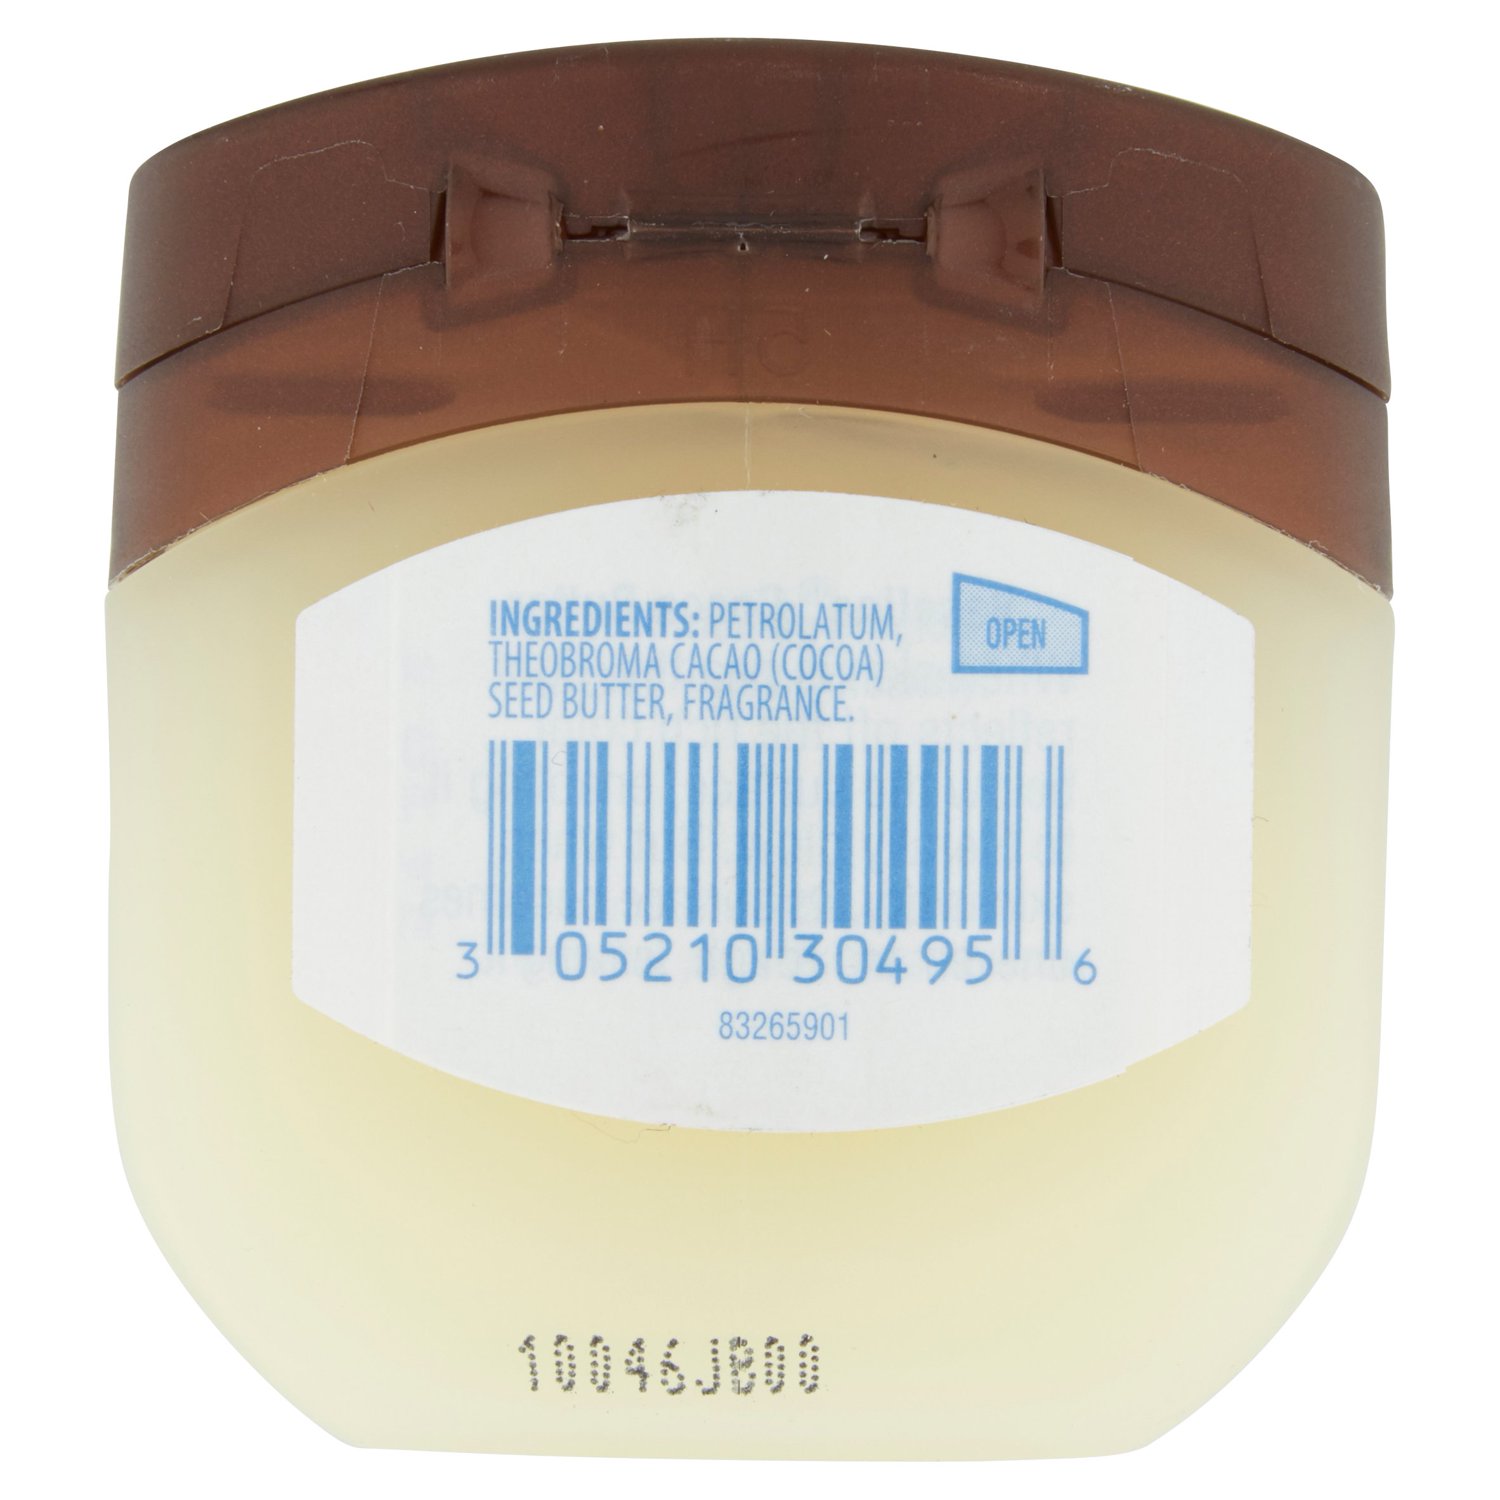 Vaseline Rich Conditioning Cocoa Butter Healing Petroleum Jelly for Dry Skin, 1.75 oz - image 2 of 6